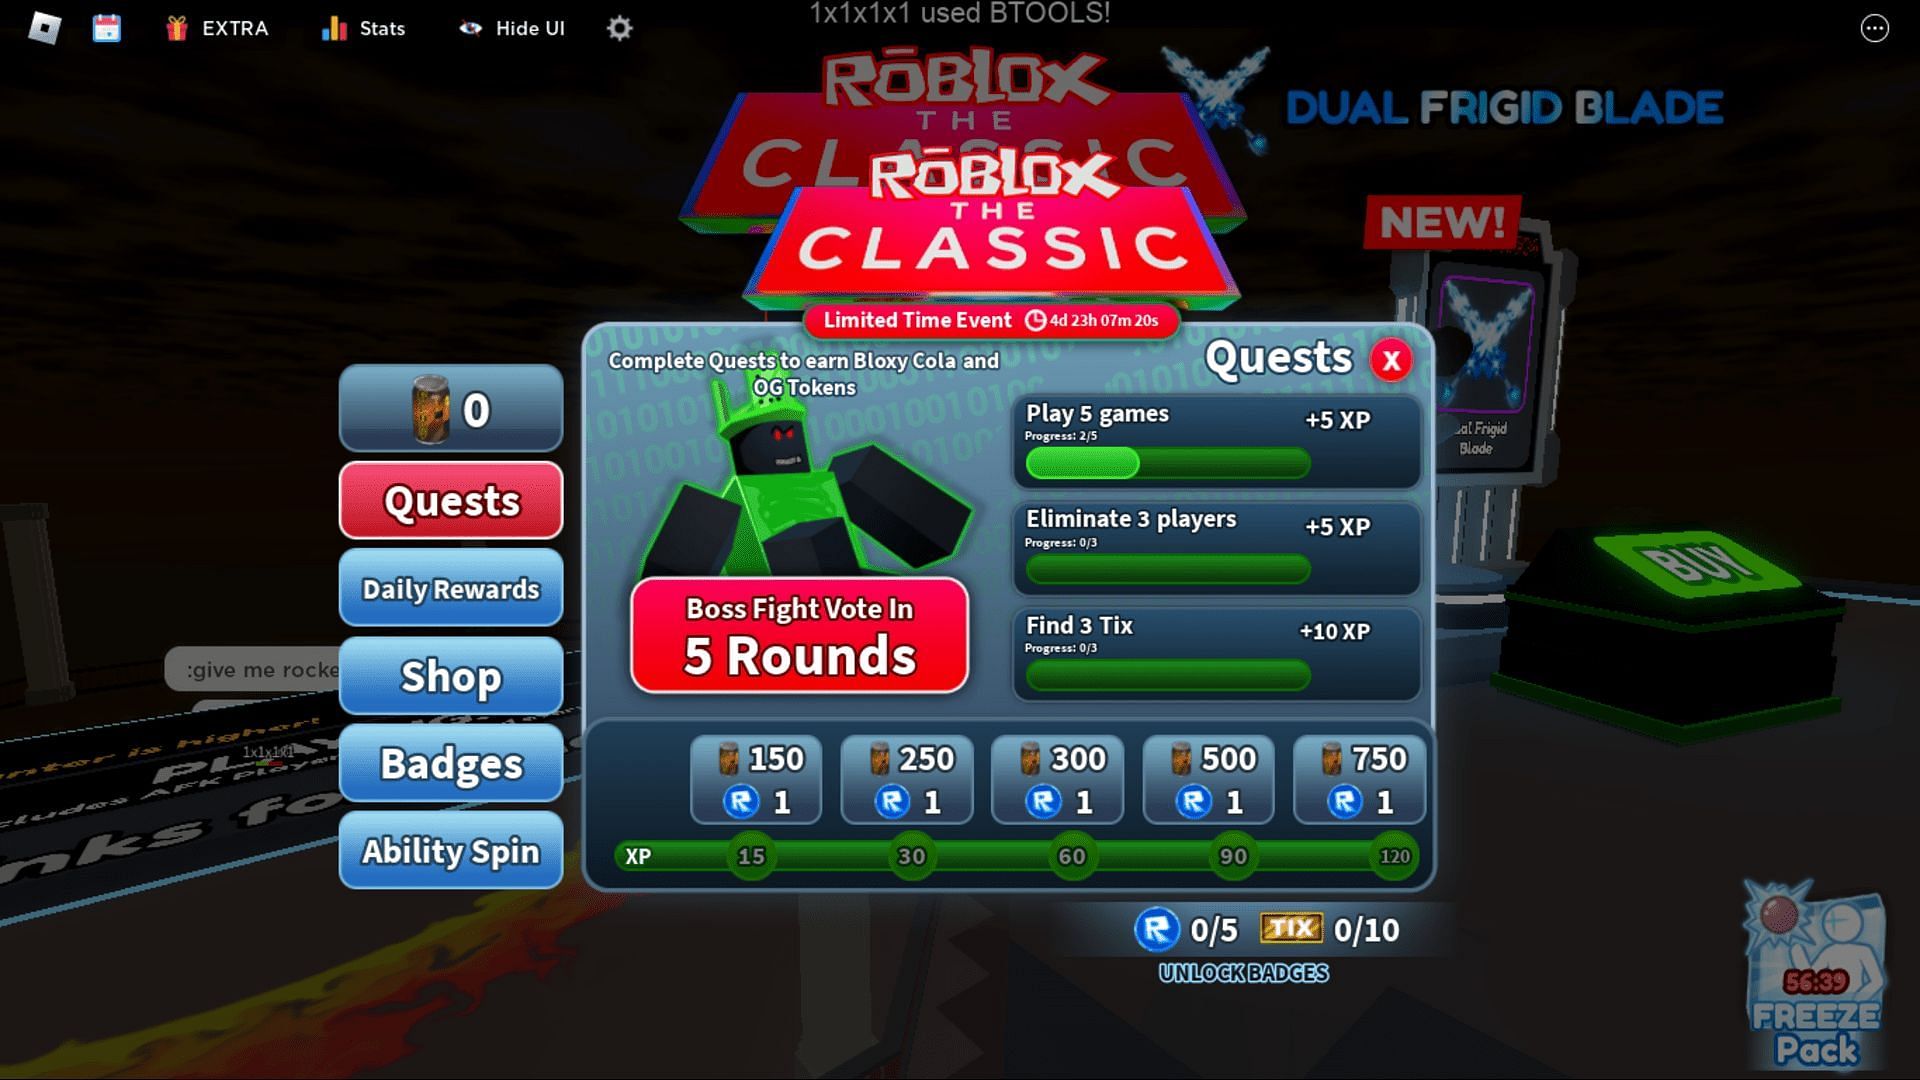 Screenshot of the quests in The Classic event in Blade Ball (Image via Roblox)